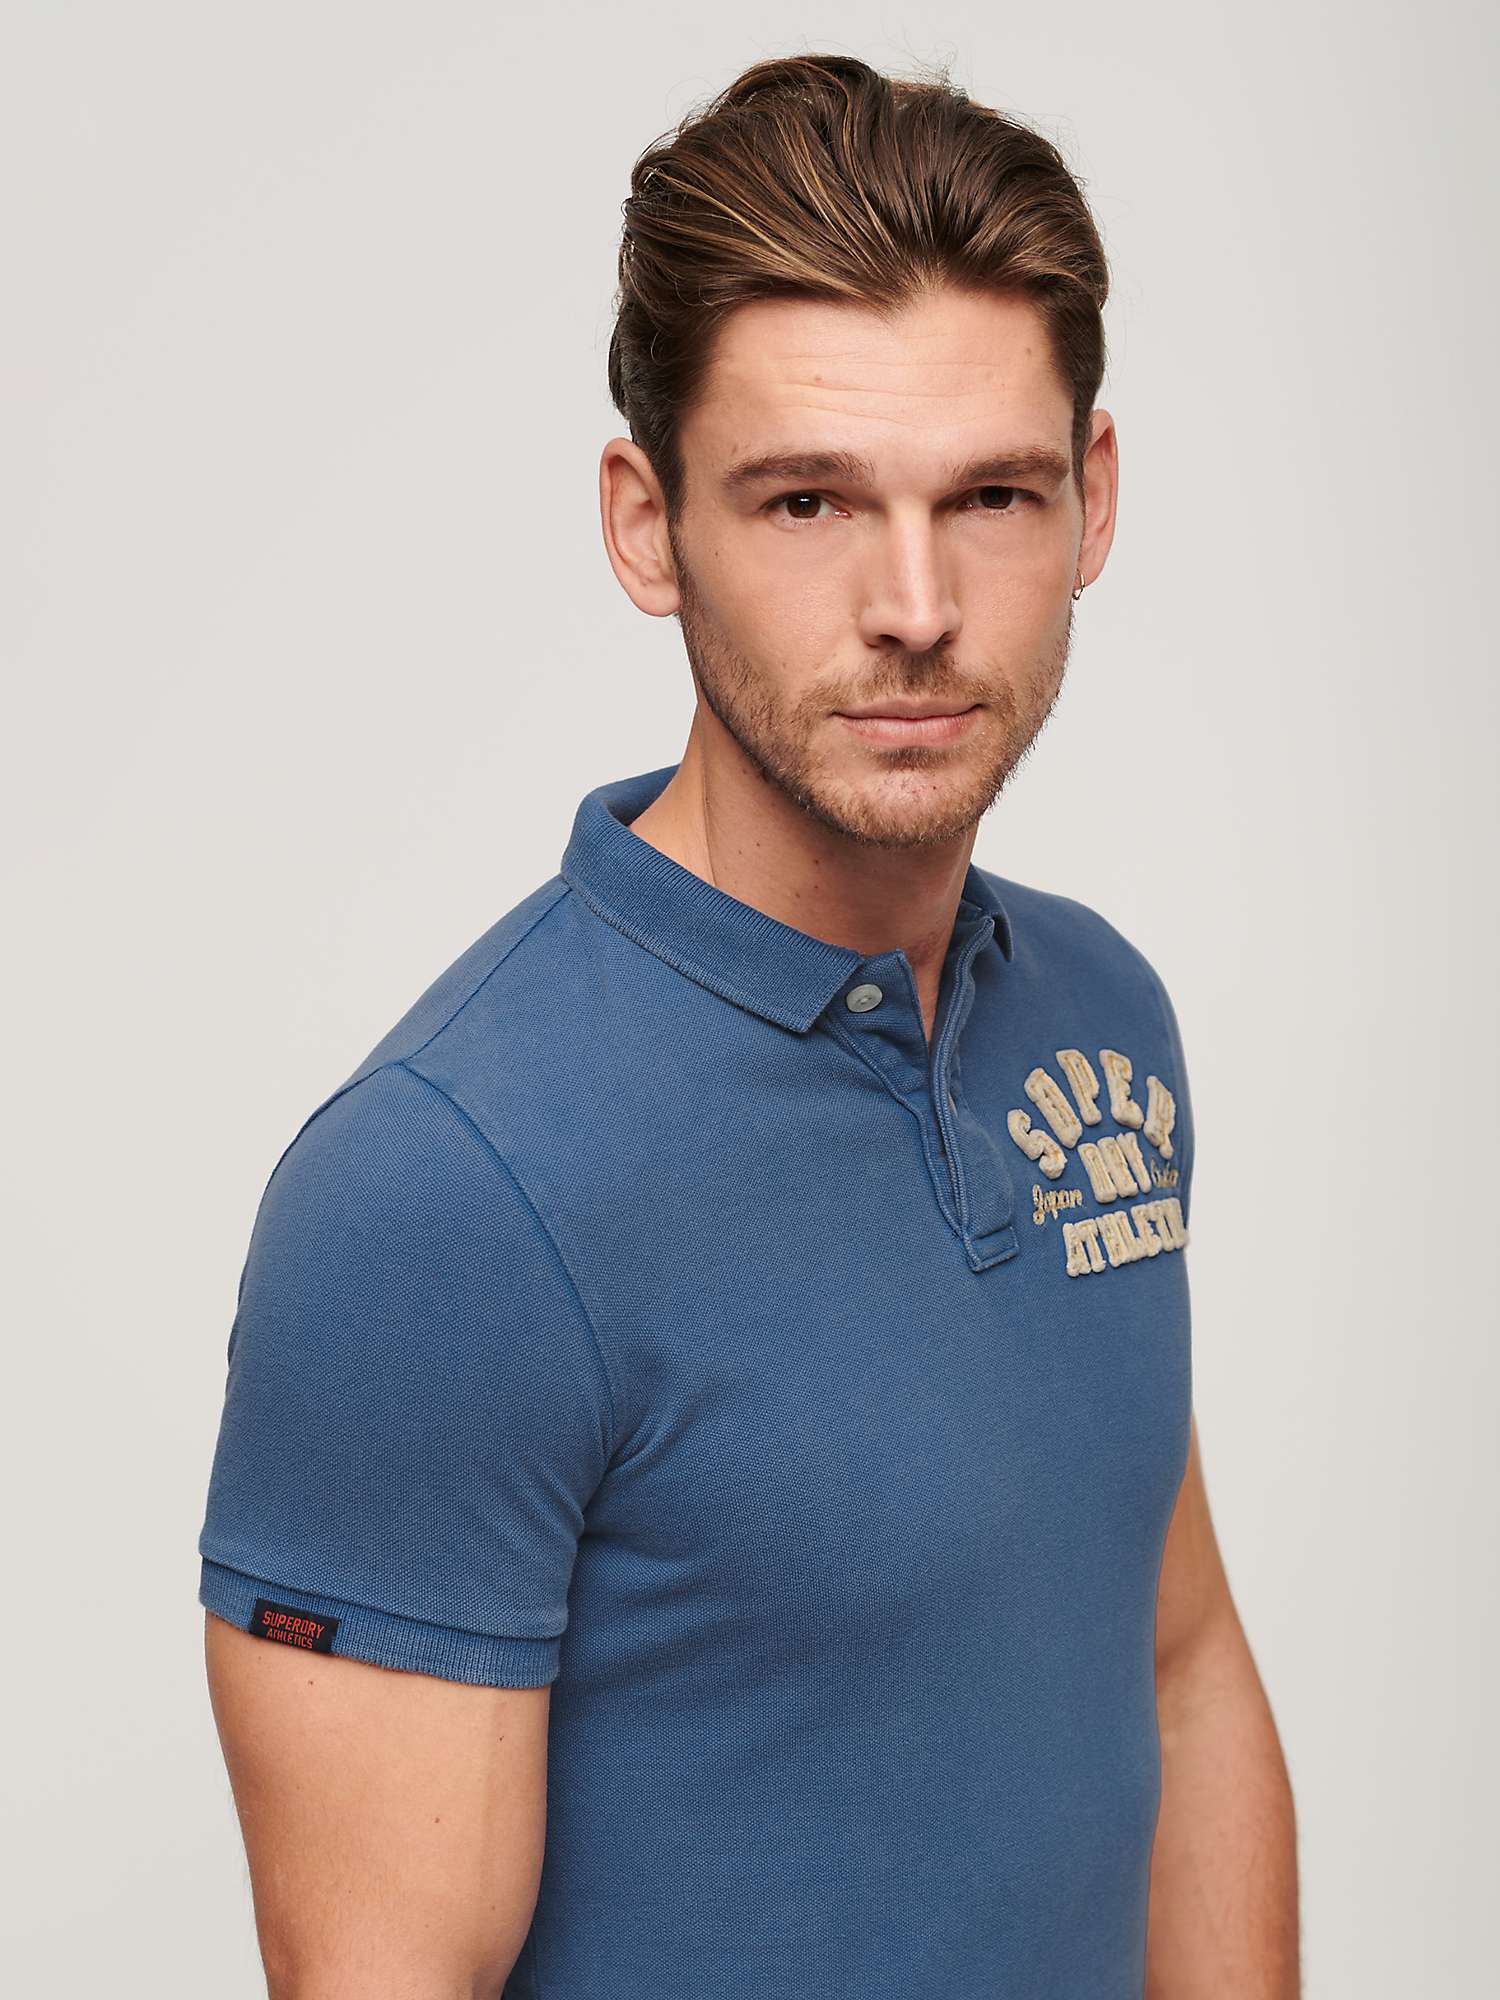 Buy Superdry Vintage Athletic Polo Shirt Online at johnlewis.com